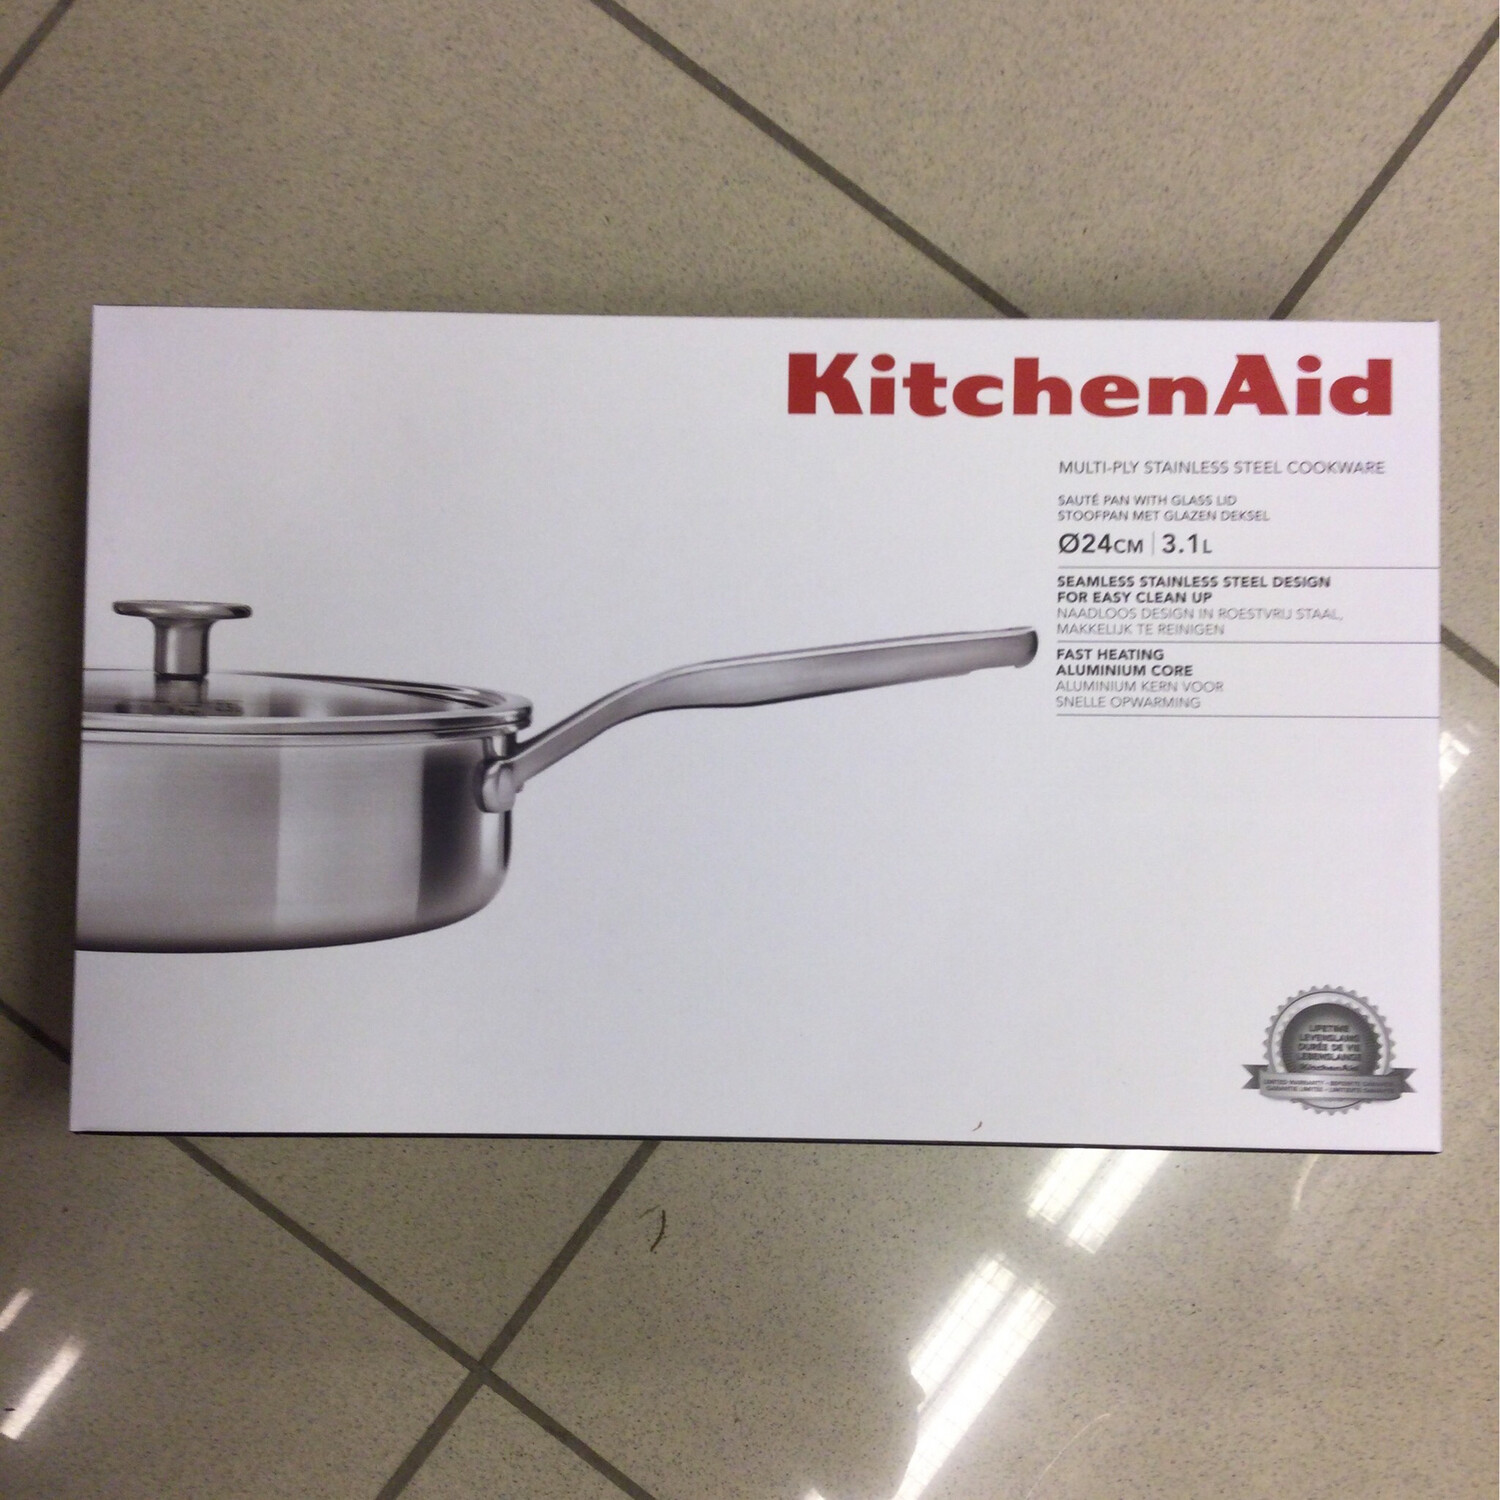 KITCHENAID Multi-ply Stainless Steel Sauté Pan With Glass Lid 24cm 3,1L